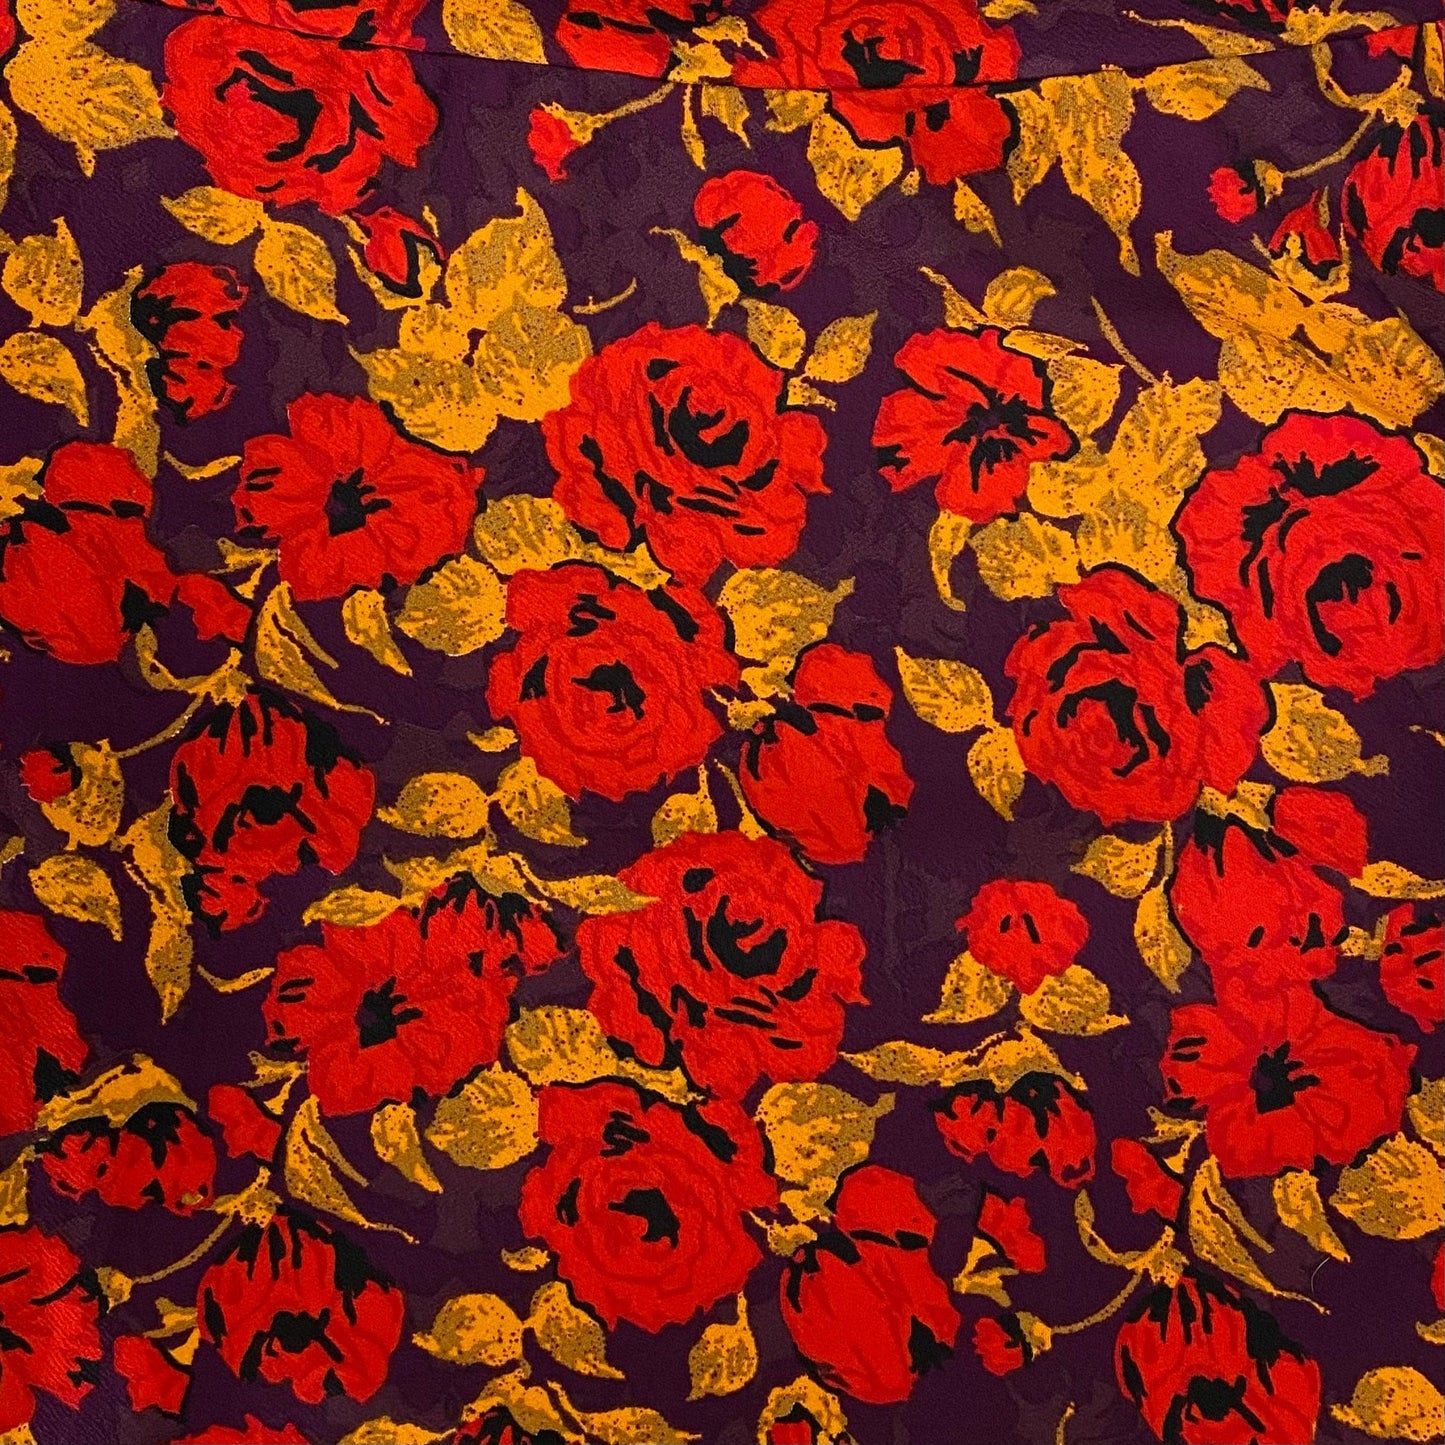 LuLaRoe Womens XL Yellow/Red/Purple Roses Floral Print Cassie Skirt NWT*